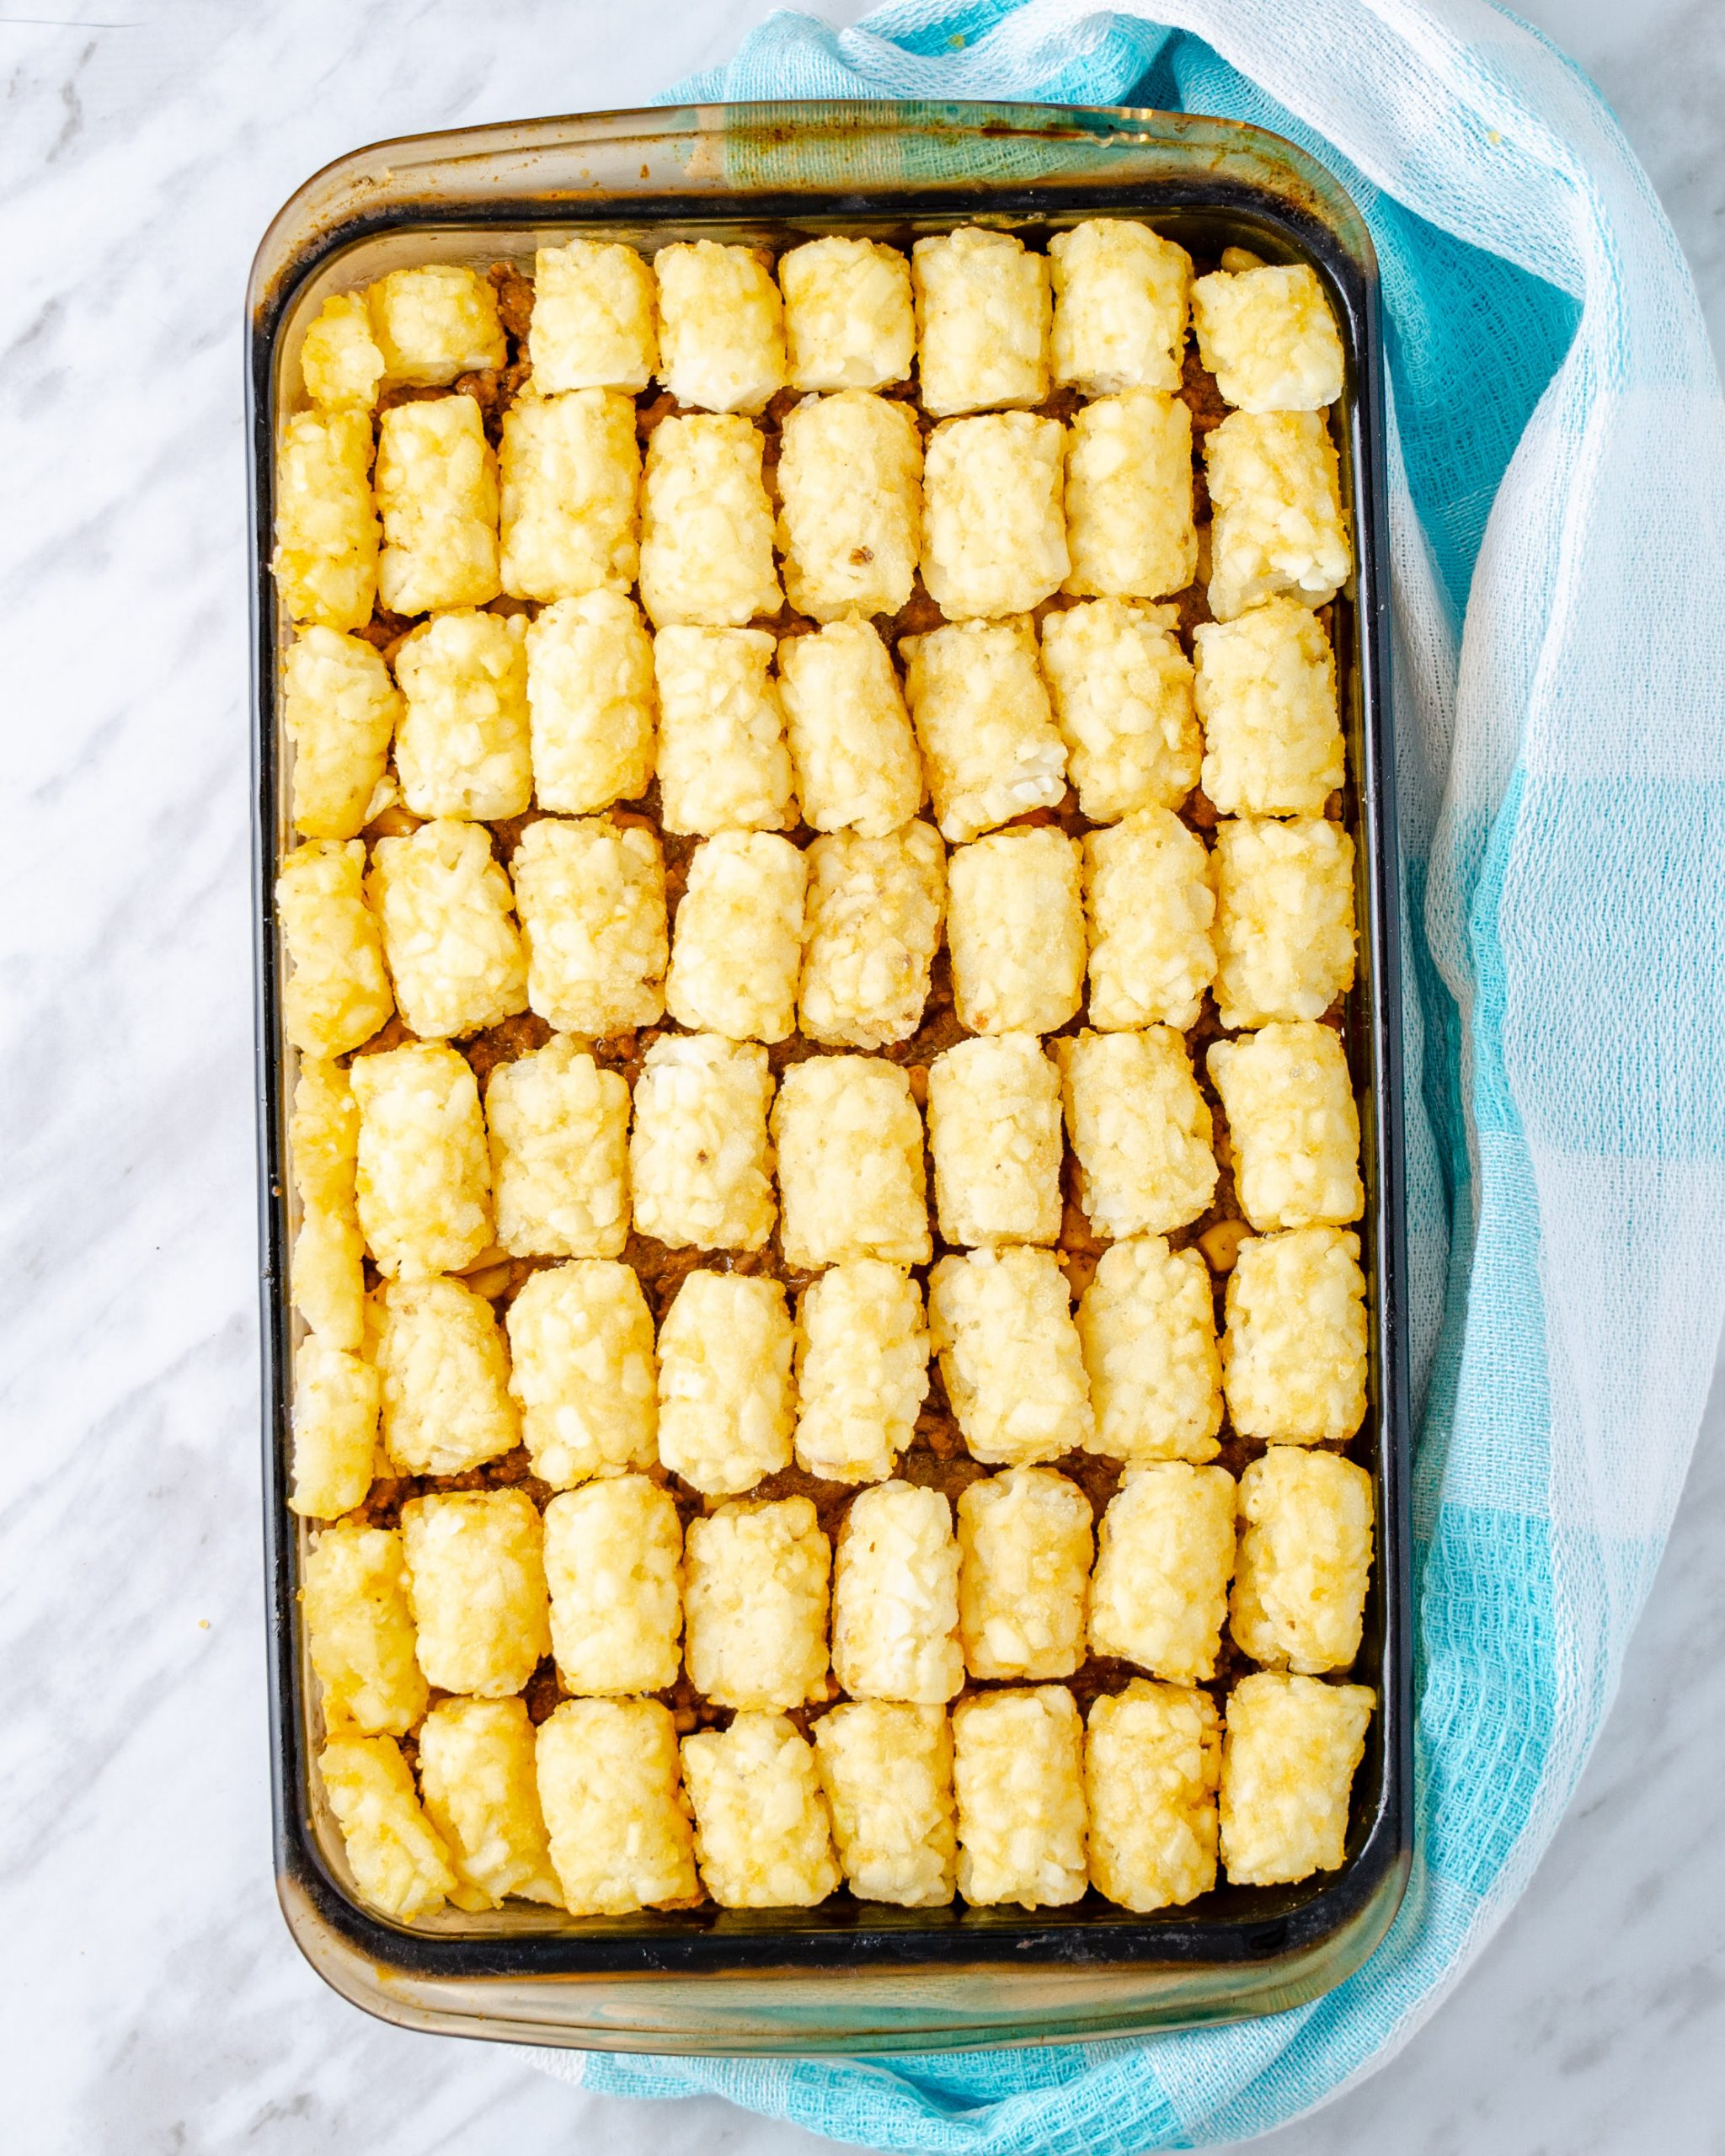 Top the mixture with the tater tots in an even layer.